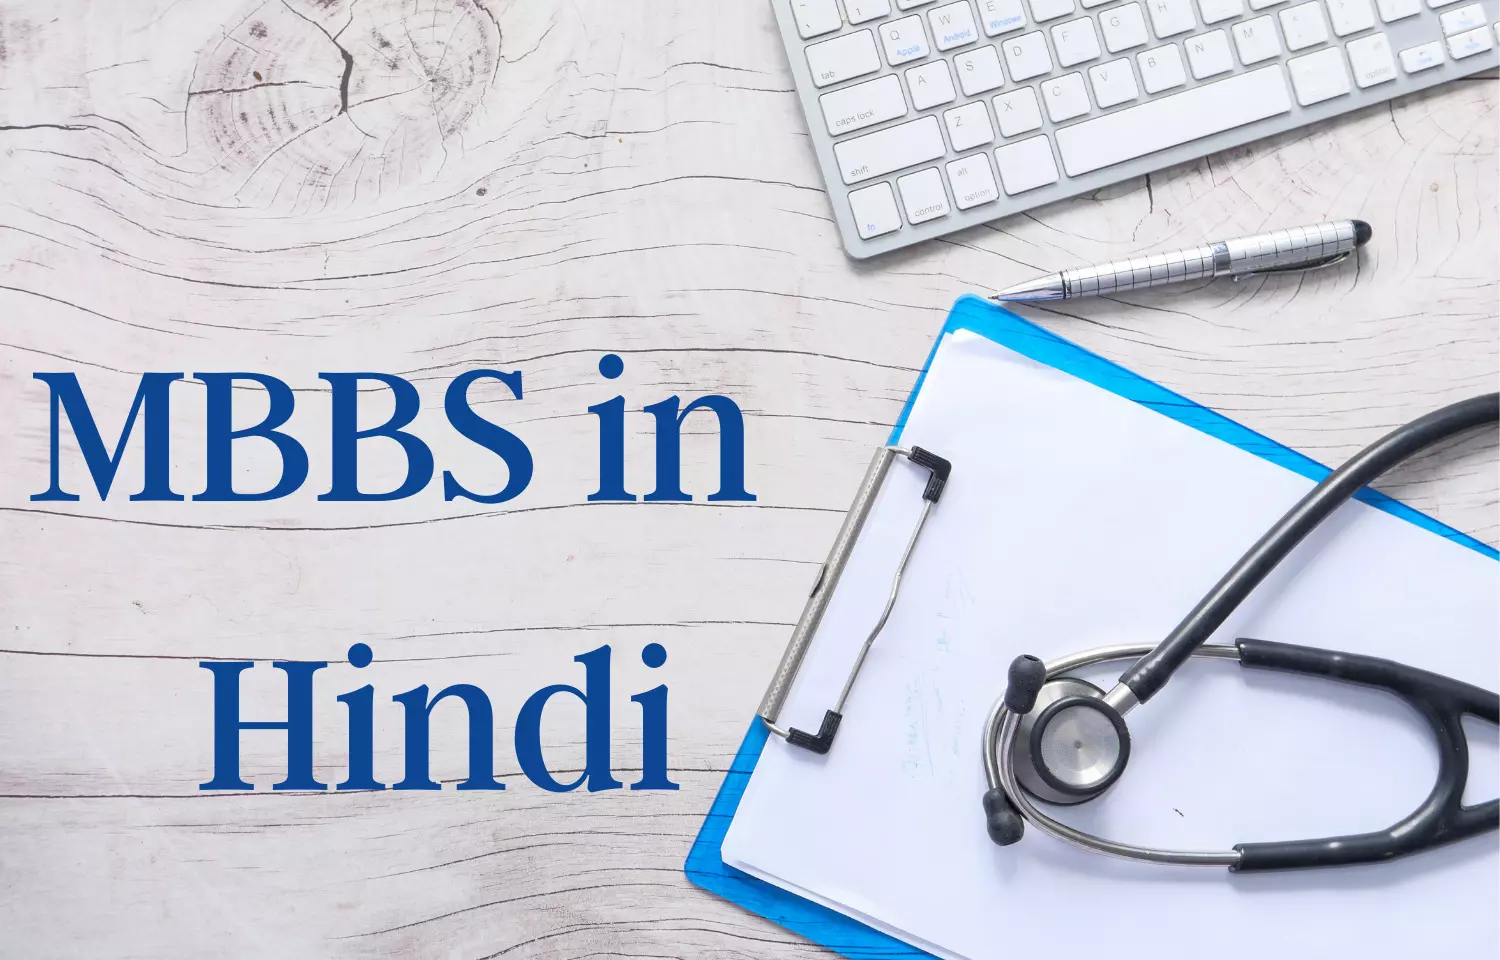 MBBS in Hindi would be inconvenient, say doctors